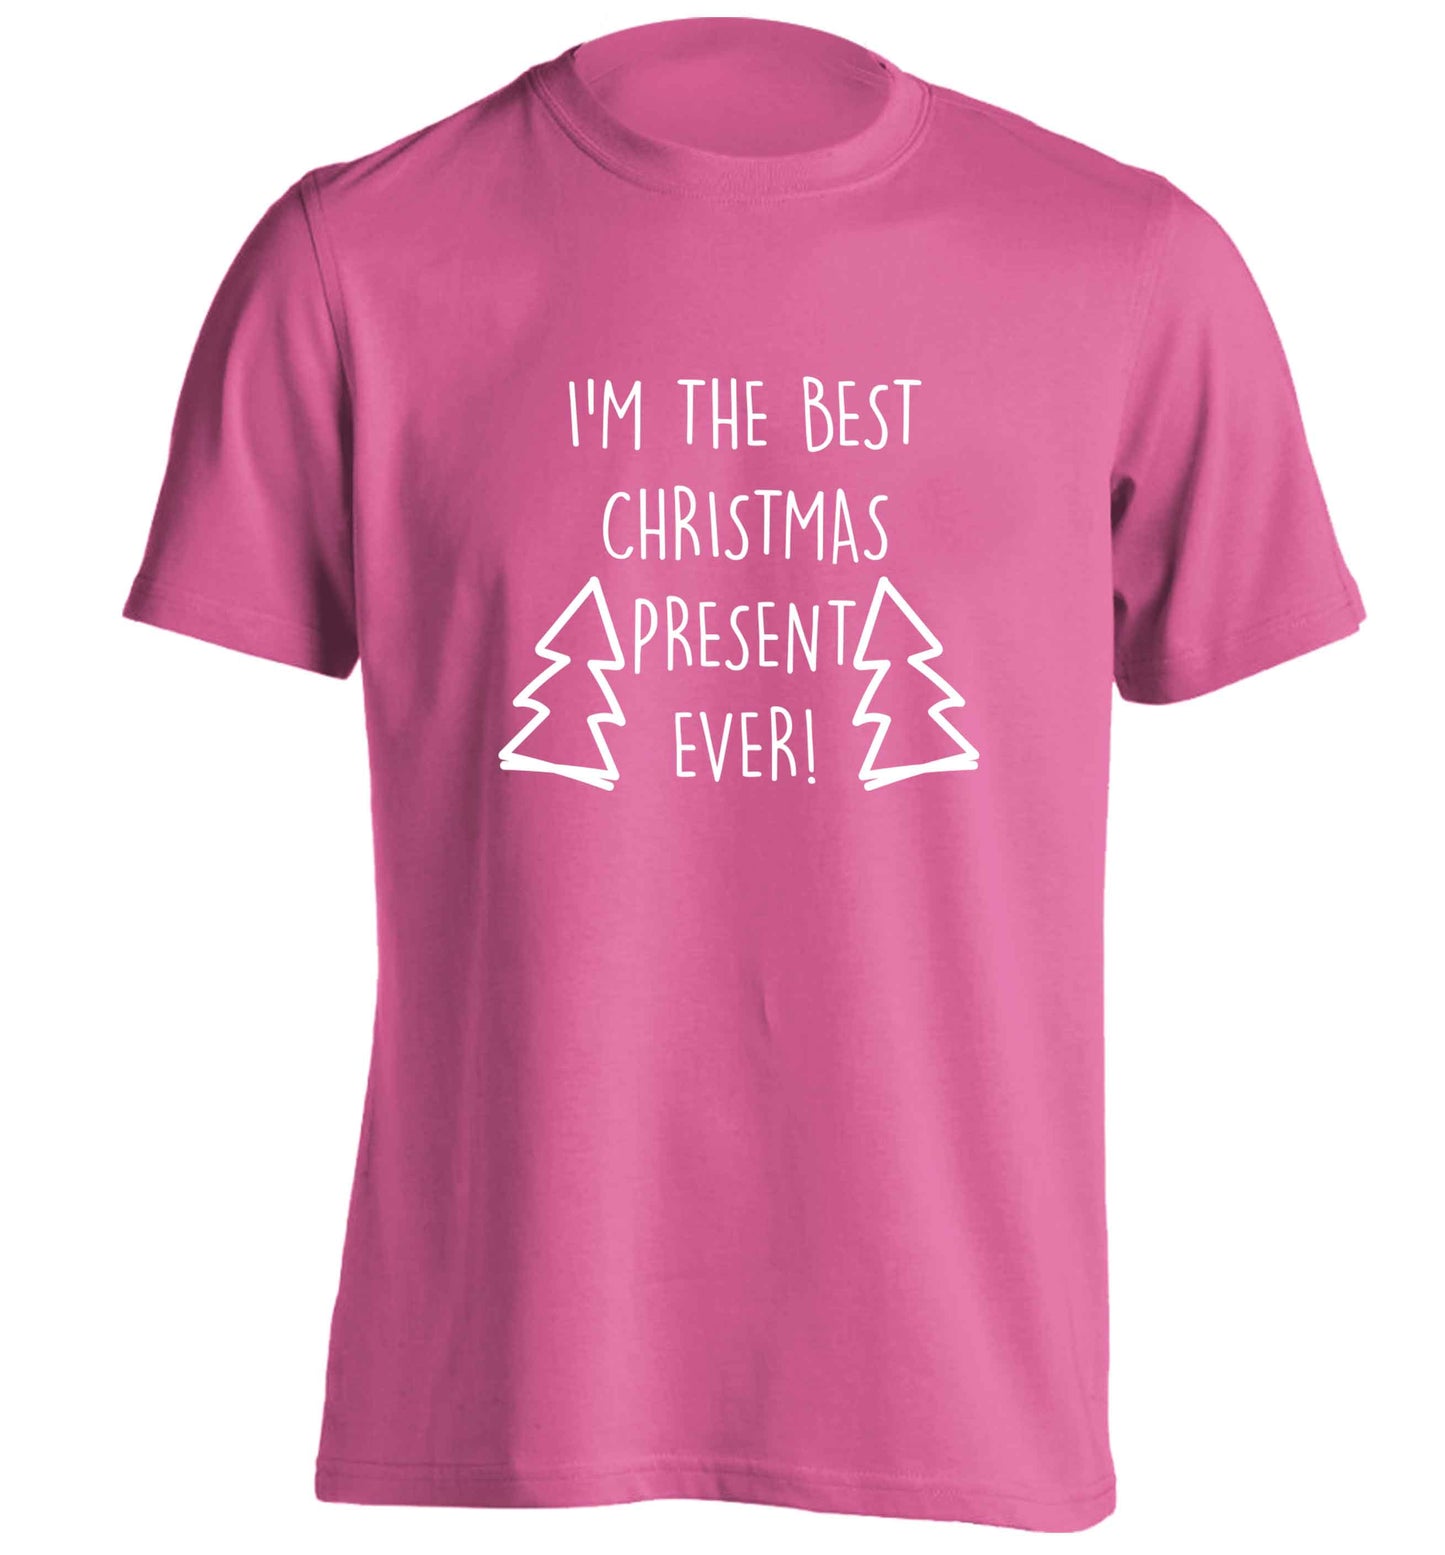 I'm the best Christmas present ever adults unisex pink Tshirt 2XL